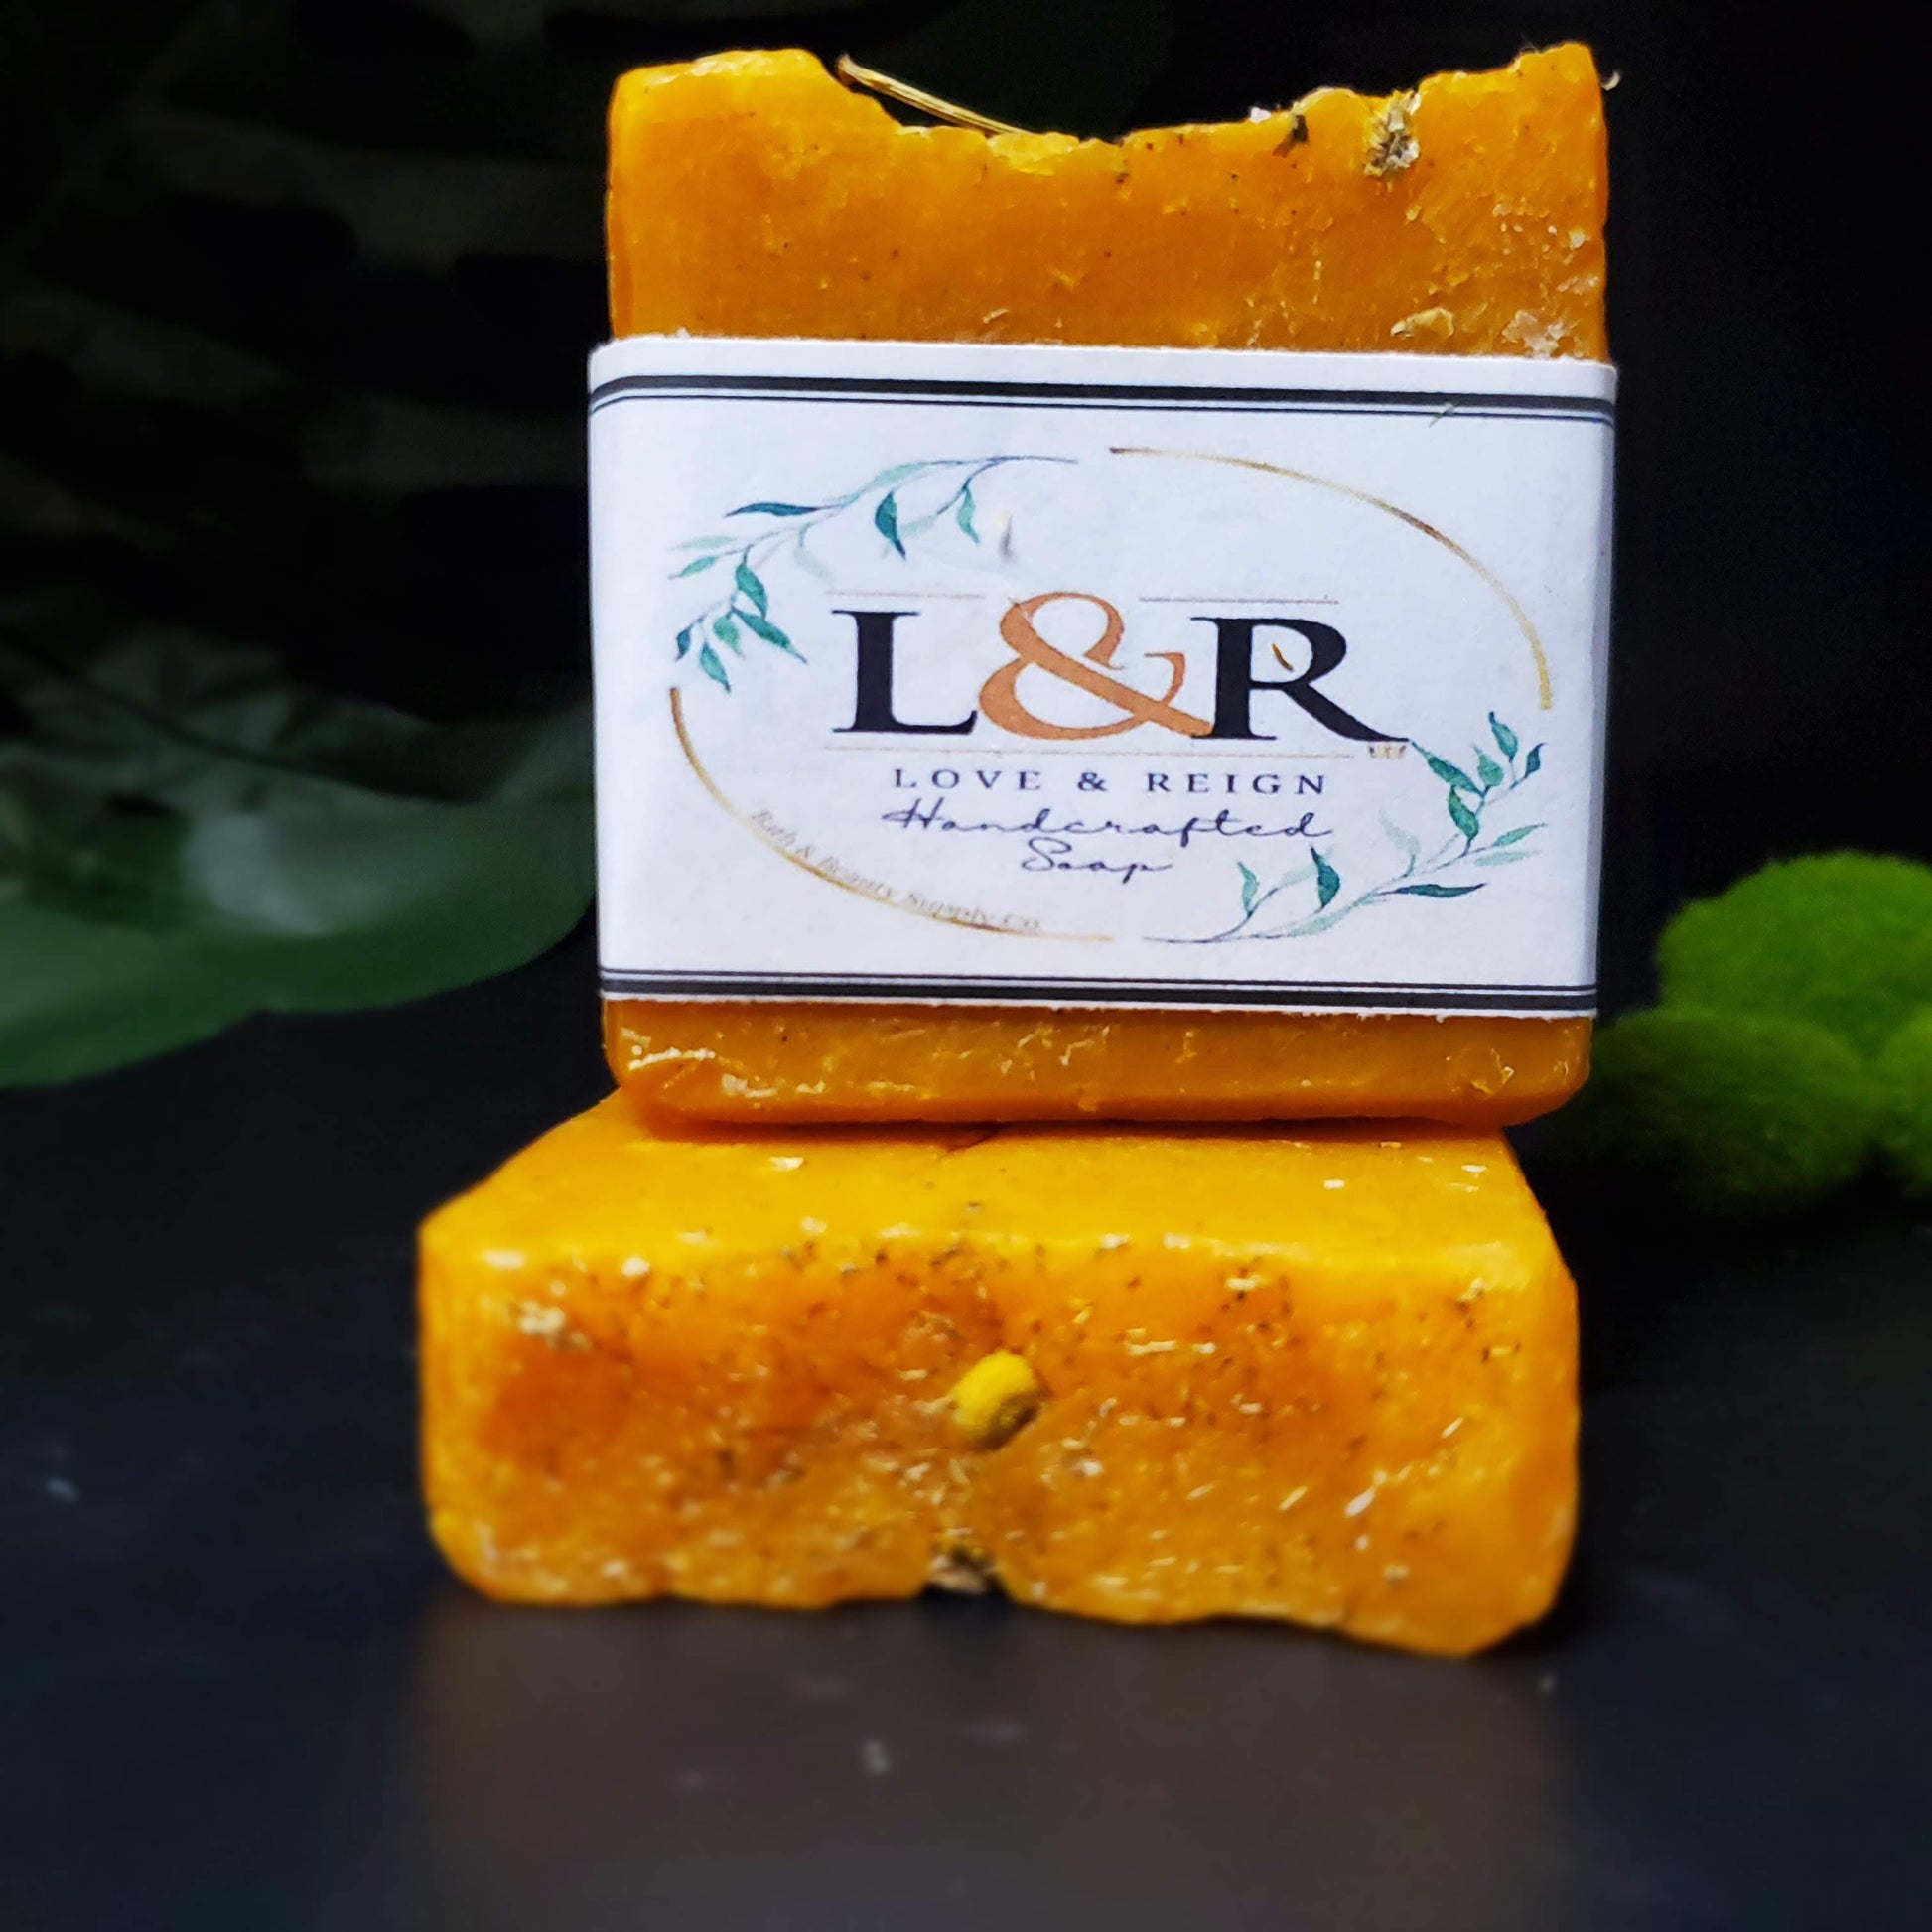 Handcrafted with all natural ingredients (saponified shea butter, coconut oil ,olive oil, castor oil, and sweet almond oil) free from harsh chemicals. Formulated using a plant based recipe, designed to cleanse your cleanse your hair and provide moisturization. Our soap designs and fragrances are made with natural colorants and pure essential oils. Naturally pigmented with  annatto seed powder. Scented with tea tree oil essential oil.